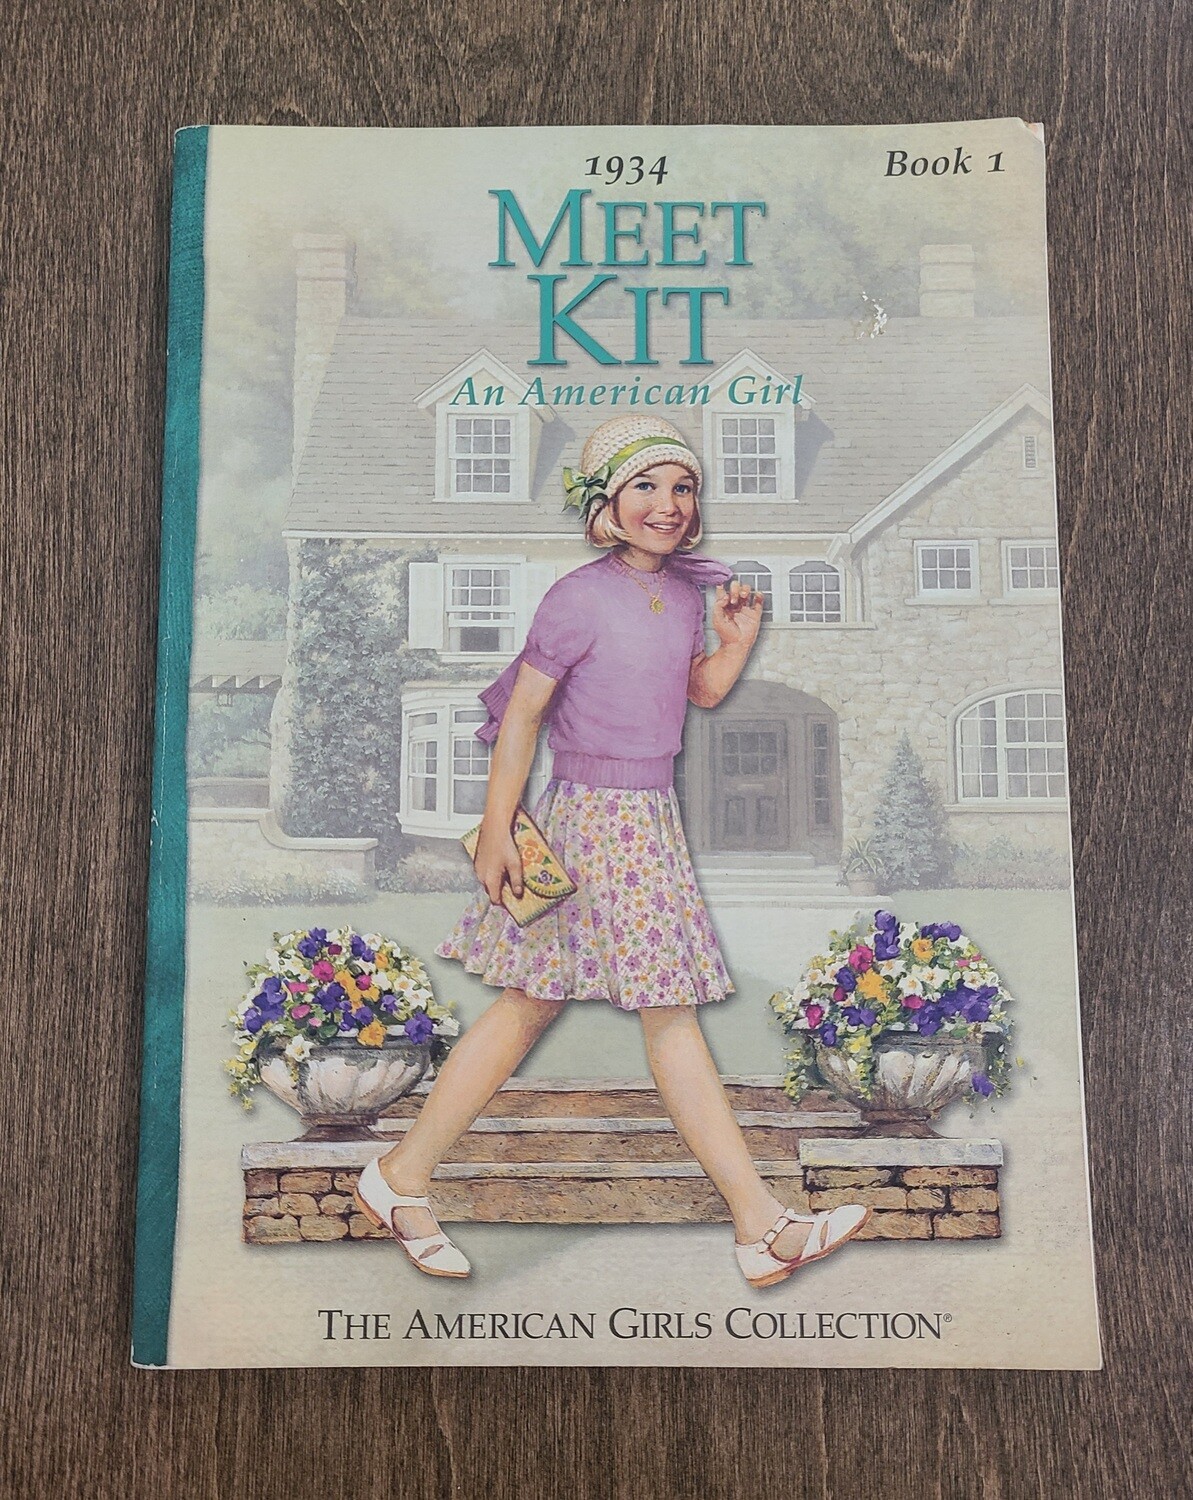 Meet Kit: An American Girl by Valerie Tripp, Walter Rane, and Susan McAliley